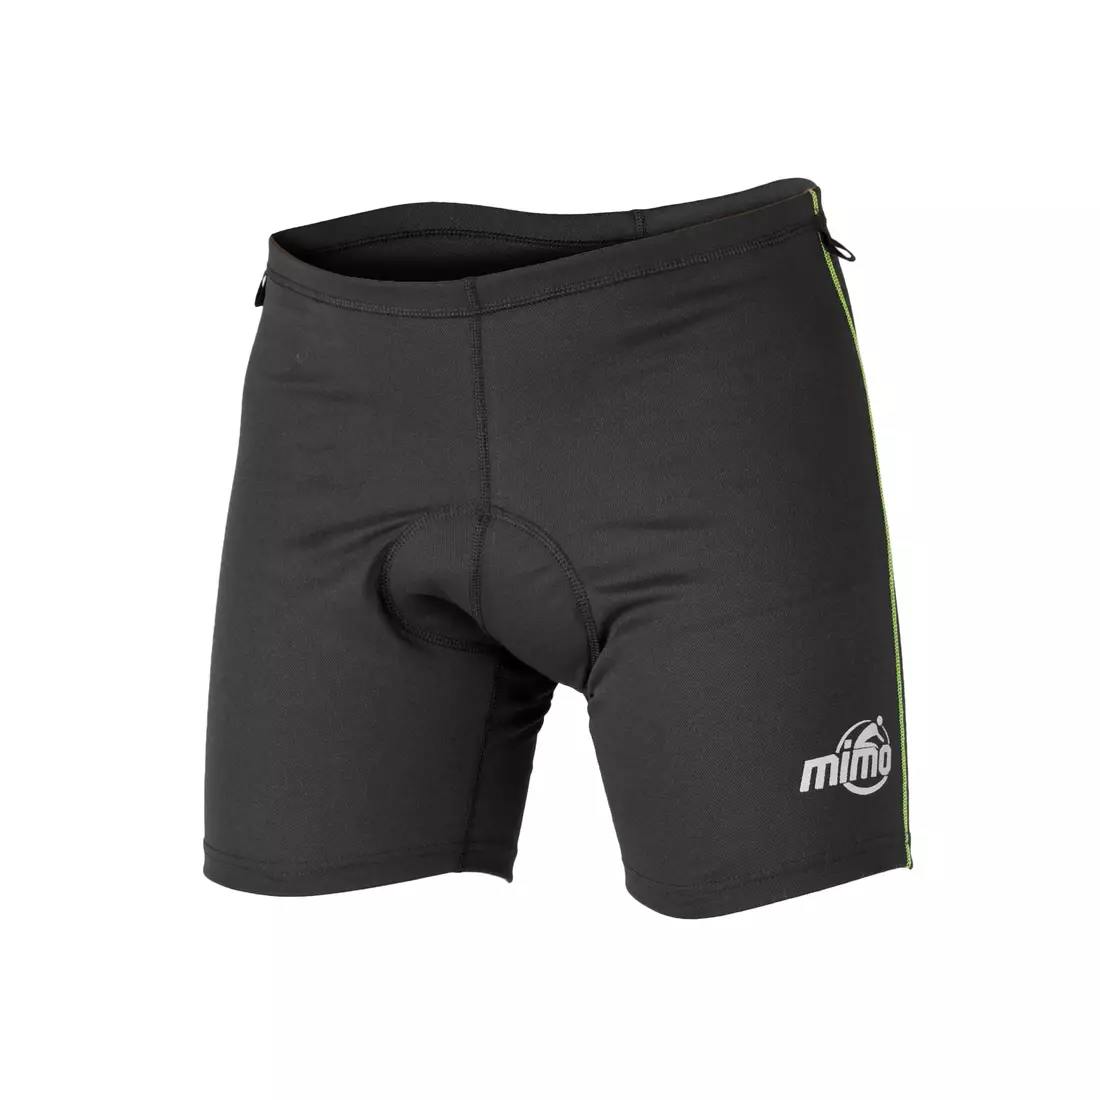 MikeSPORT cycling boxer shorts with COOLMAX insert